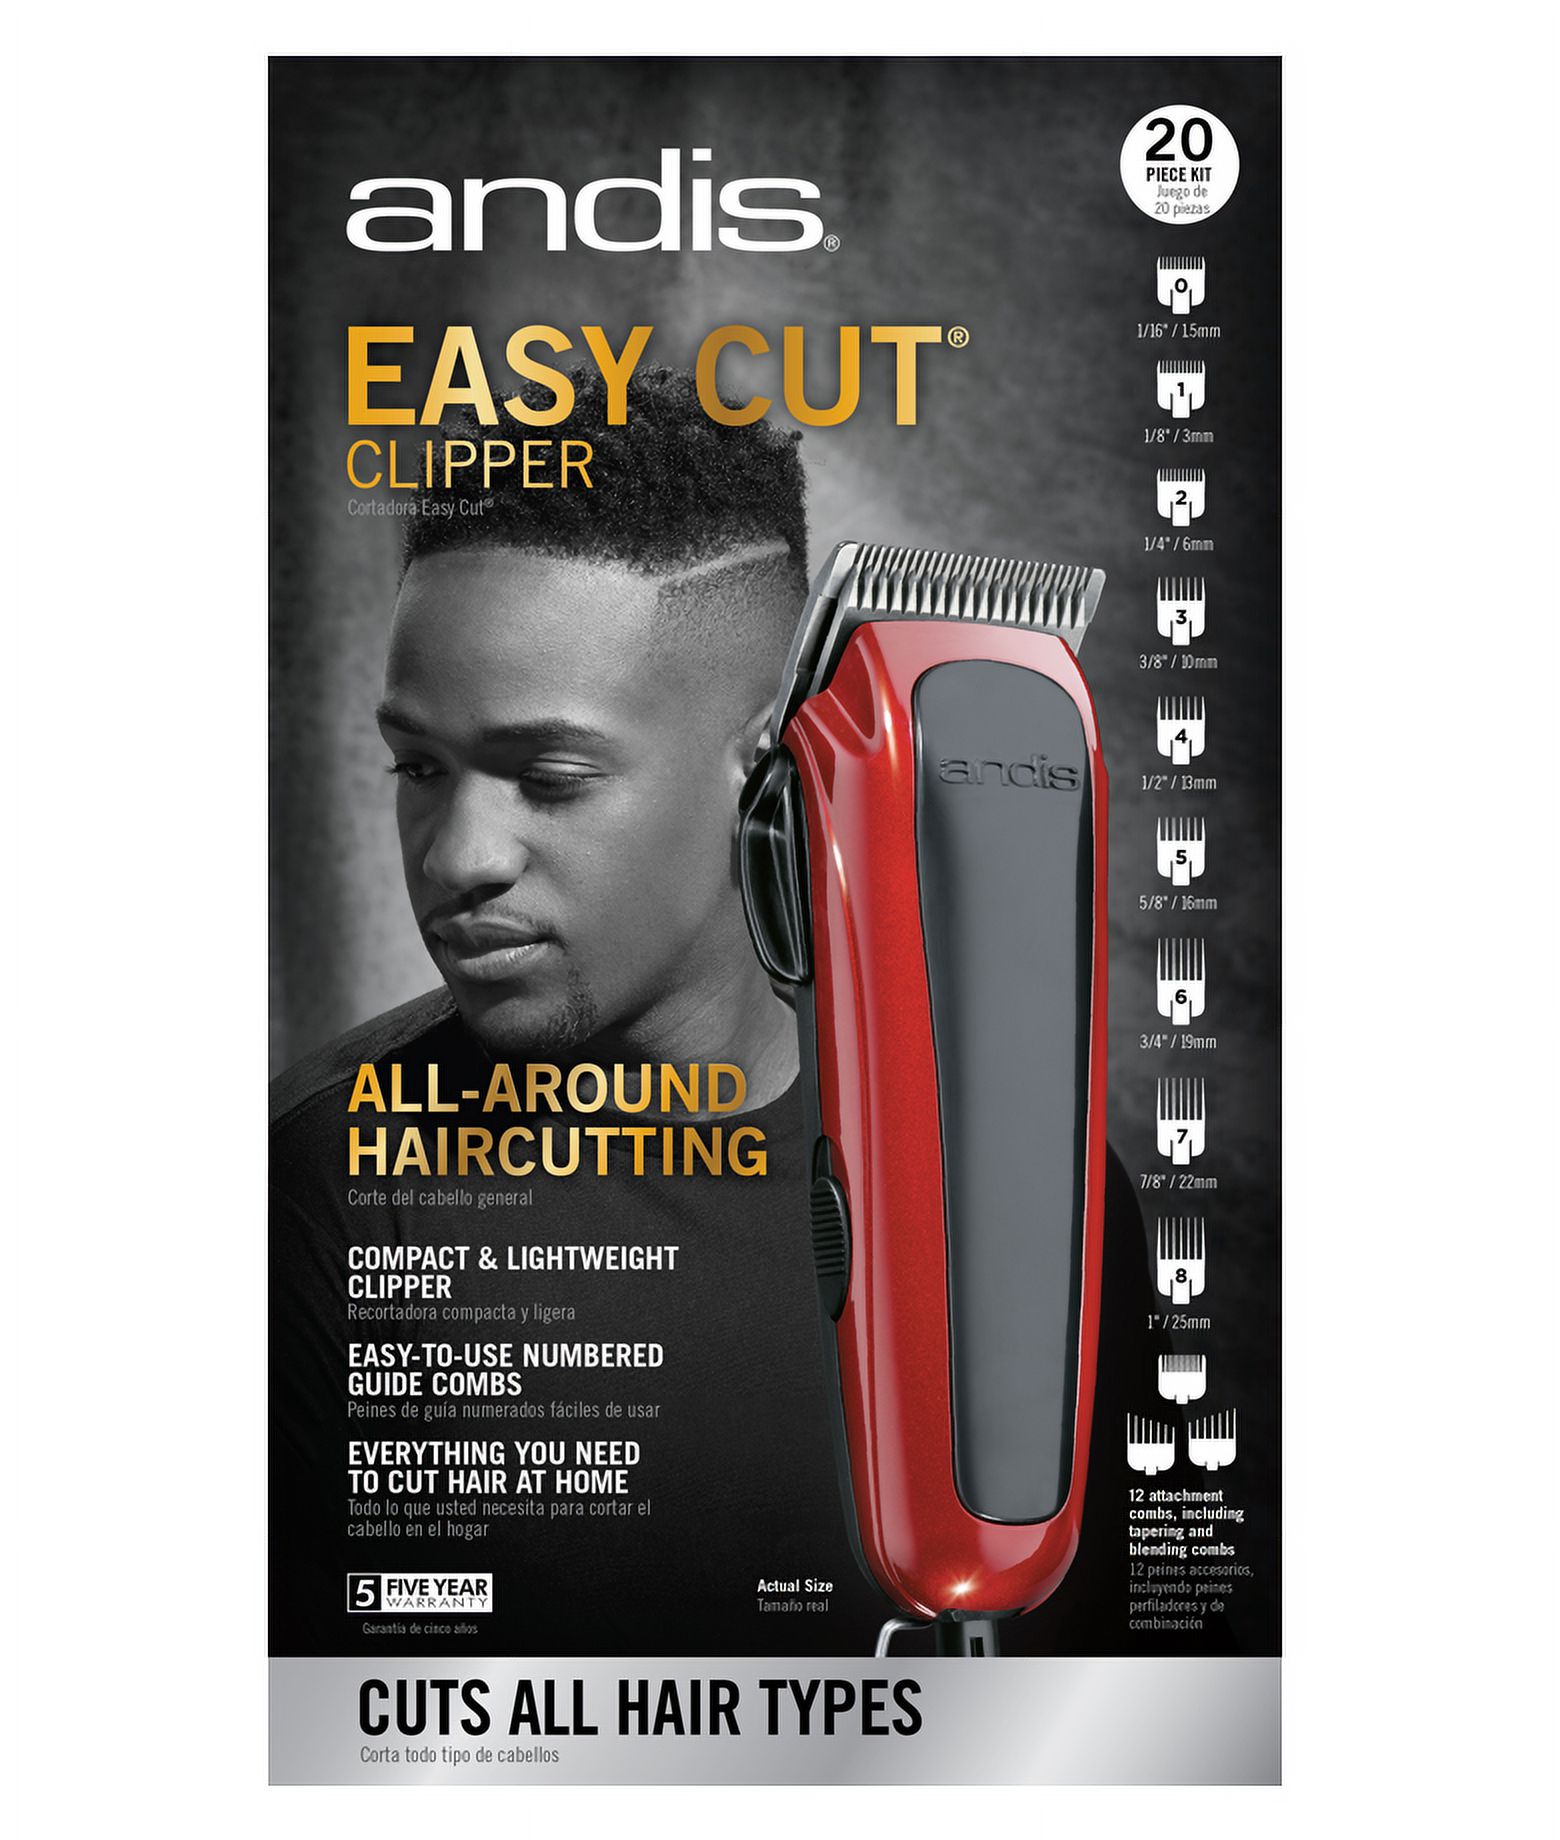 Andis EasyCut Home Haircutting Kit, Black, 20 Piece Kit with Bonus The Cut Buddy - image 2 of 3